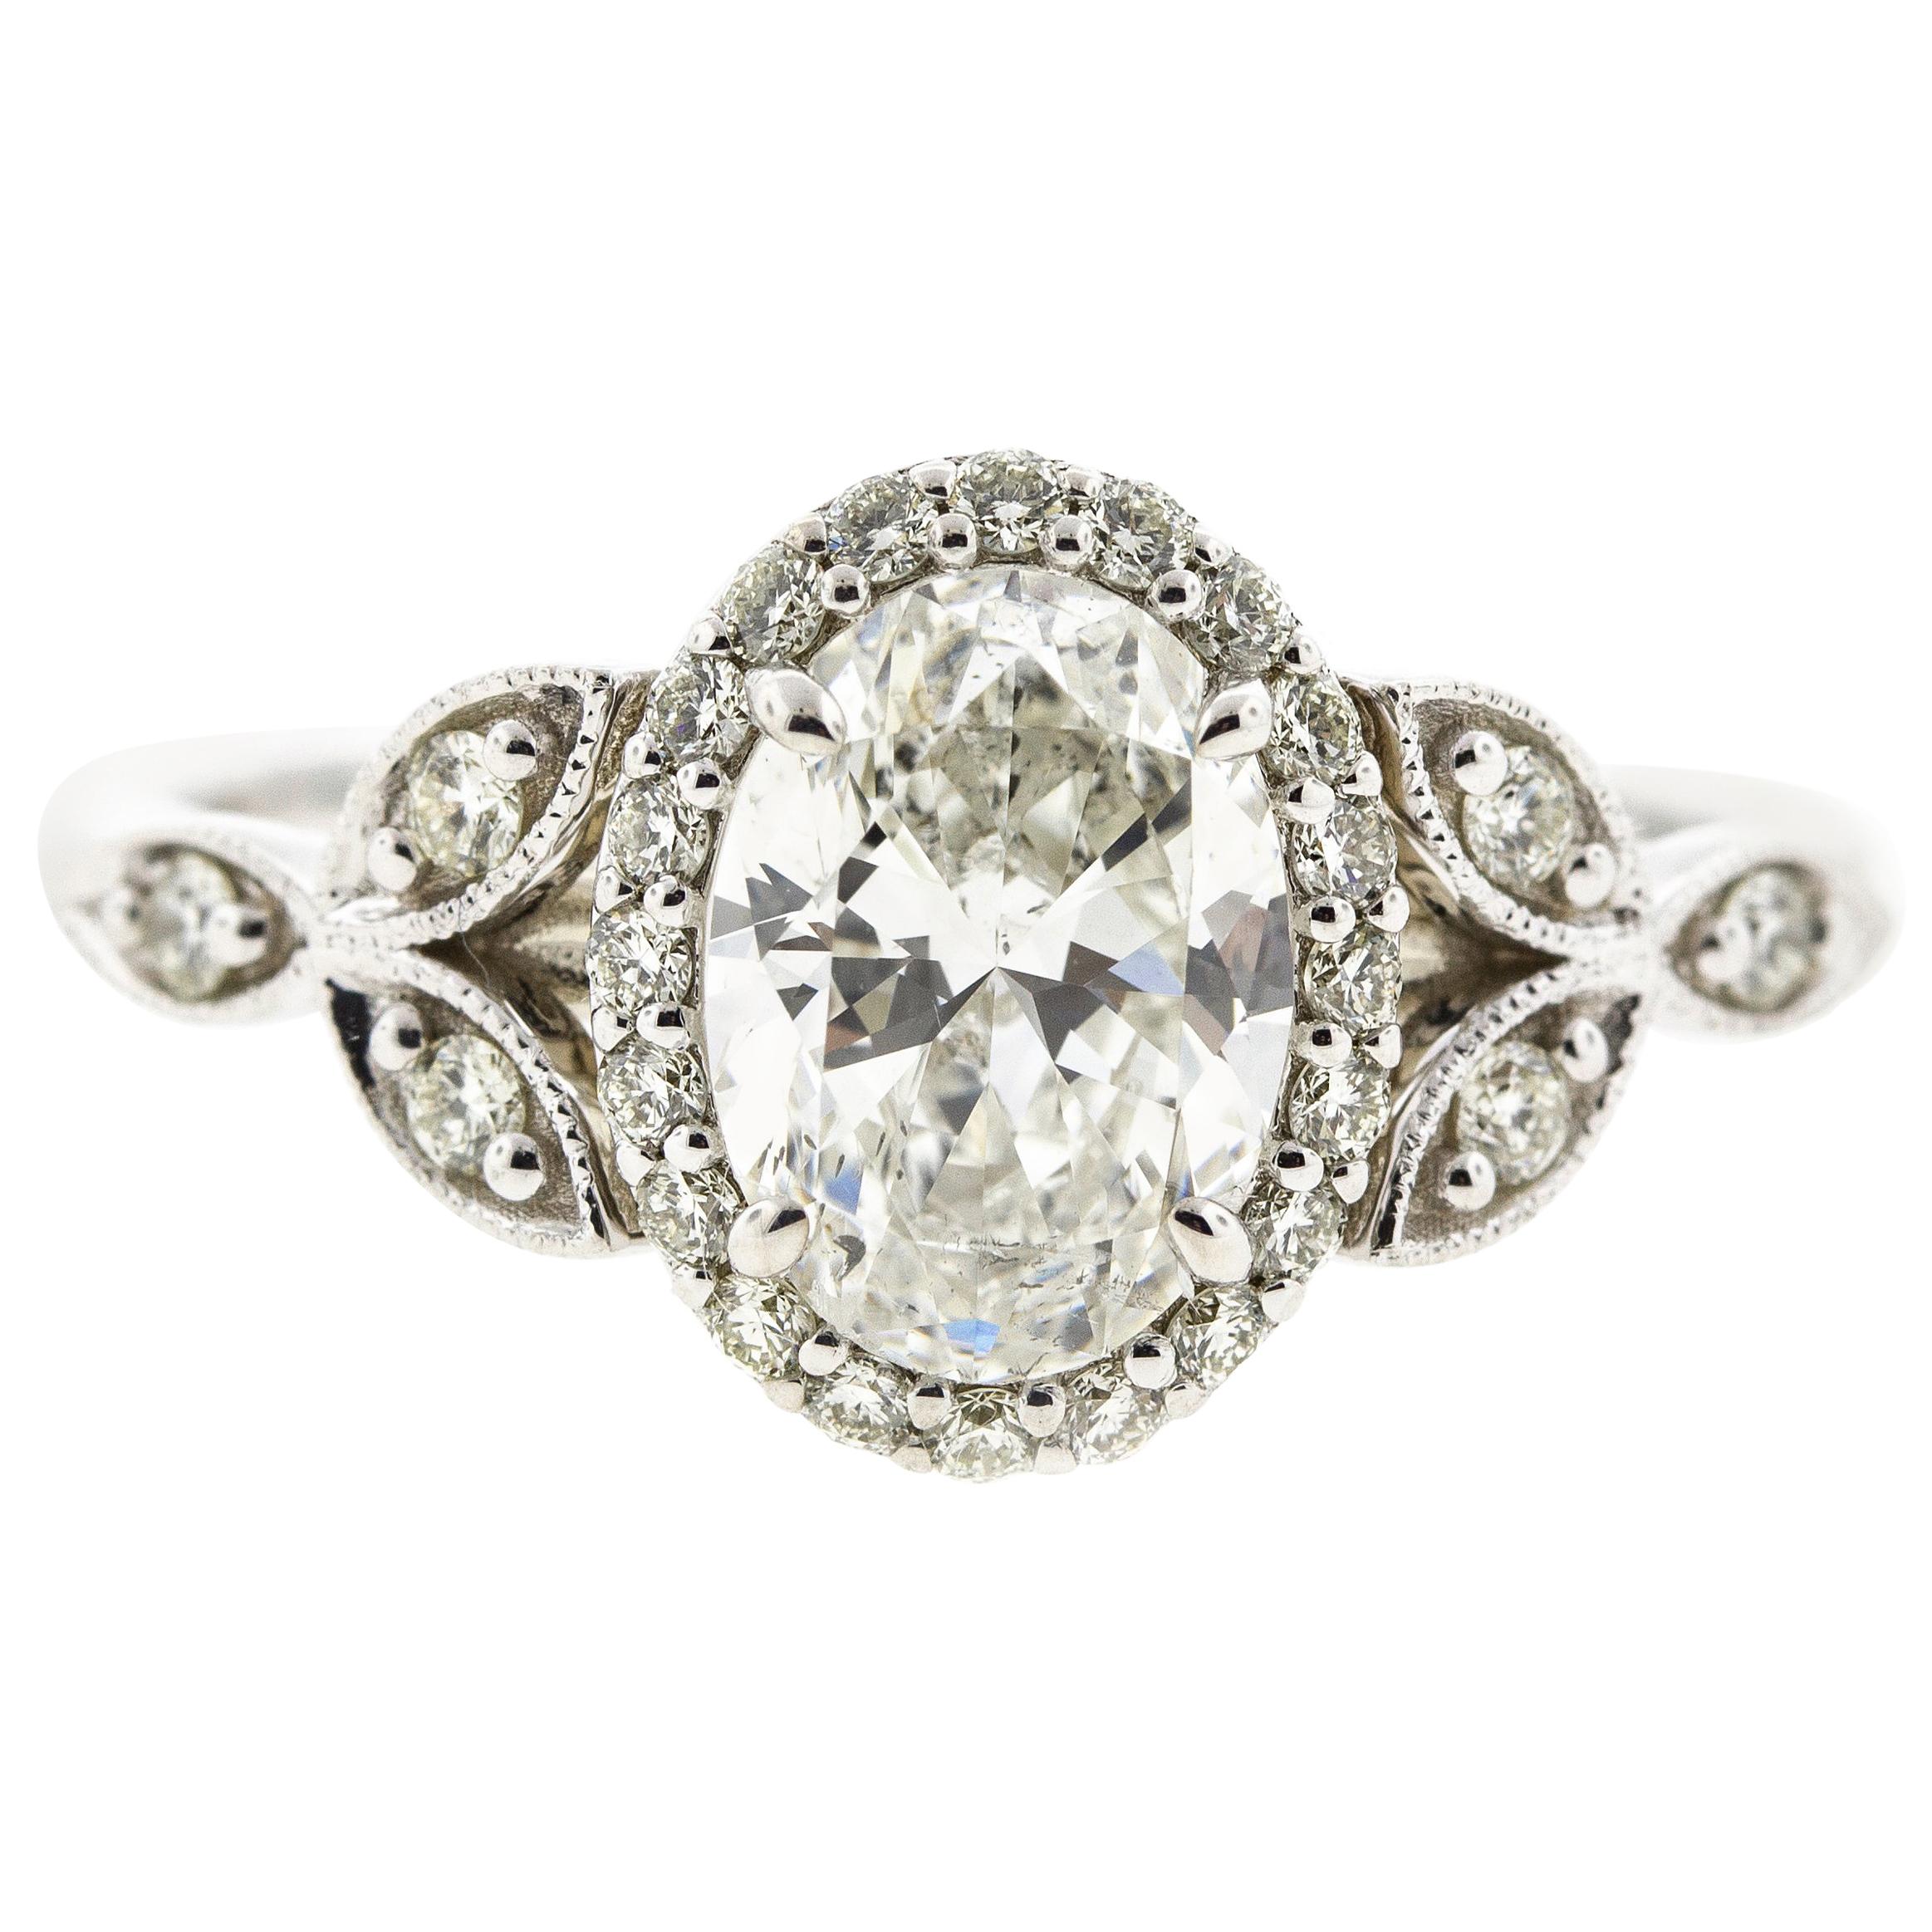 Floral Inspired Oval Diamond Engagement Ring 'Certified' For Sale